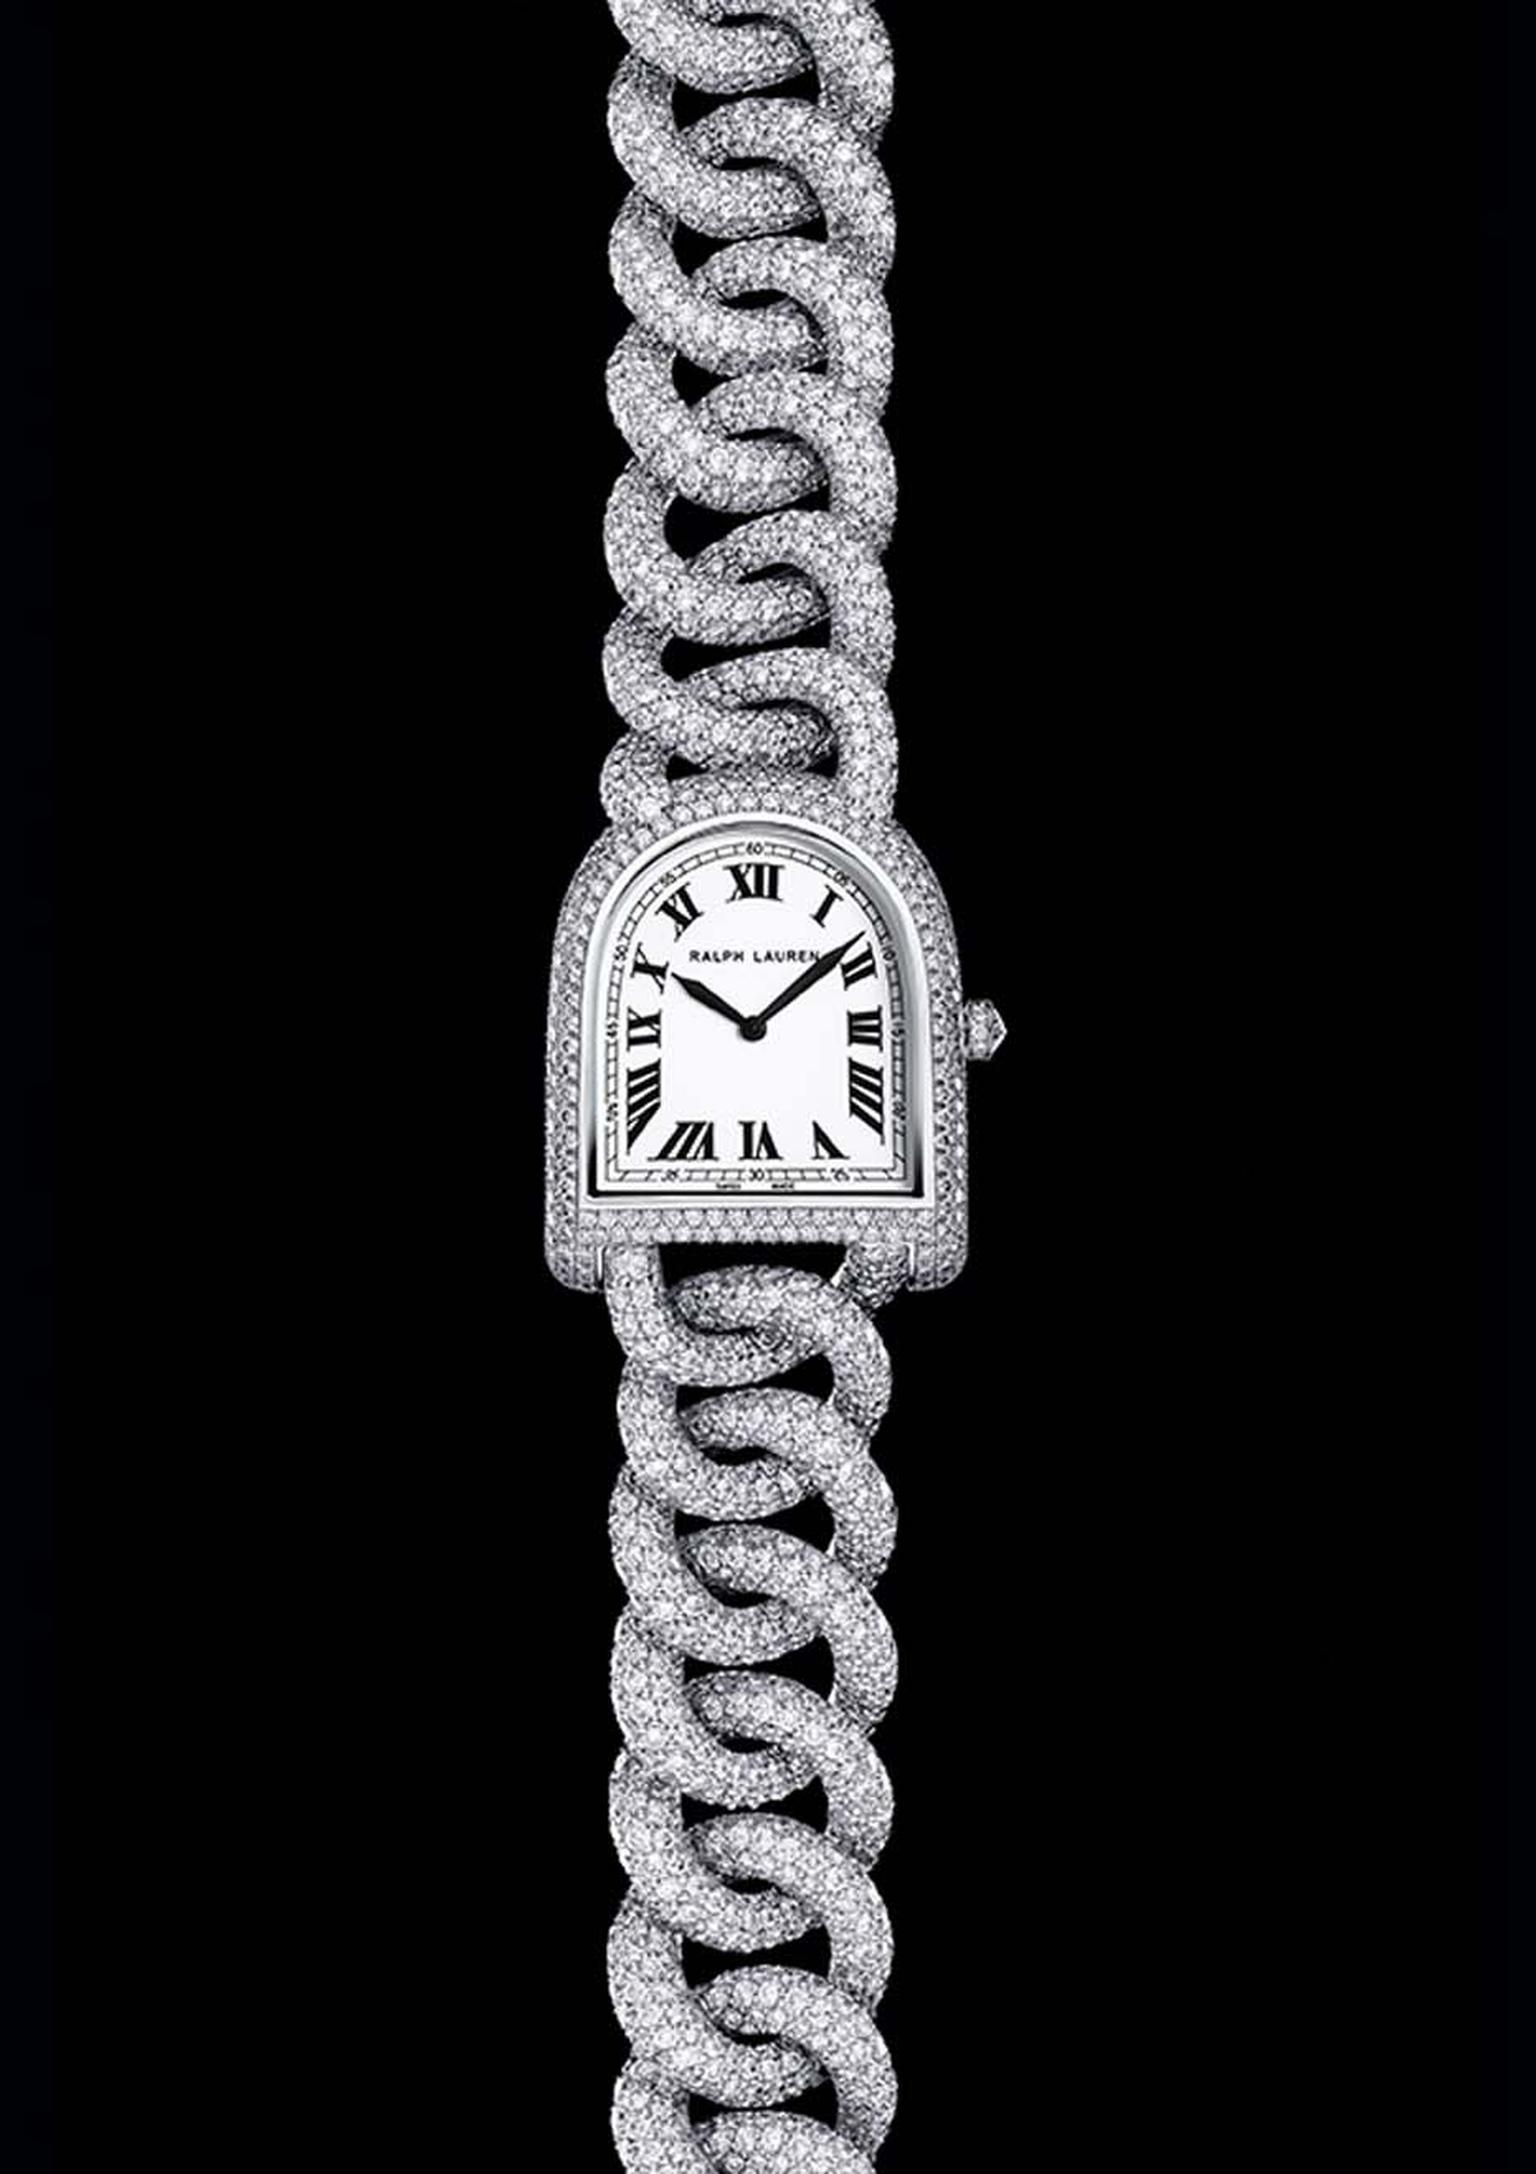 The most opulent Ralph Lauren Stirrup watch is the Petite Stirrup Diamond Link watch with a white gold case and link bracelet fully pavéd with more than 20ct of diamonds, which illuminate the off-white lacquered dial.